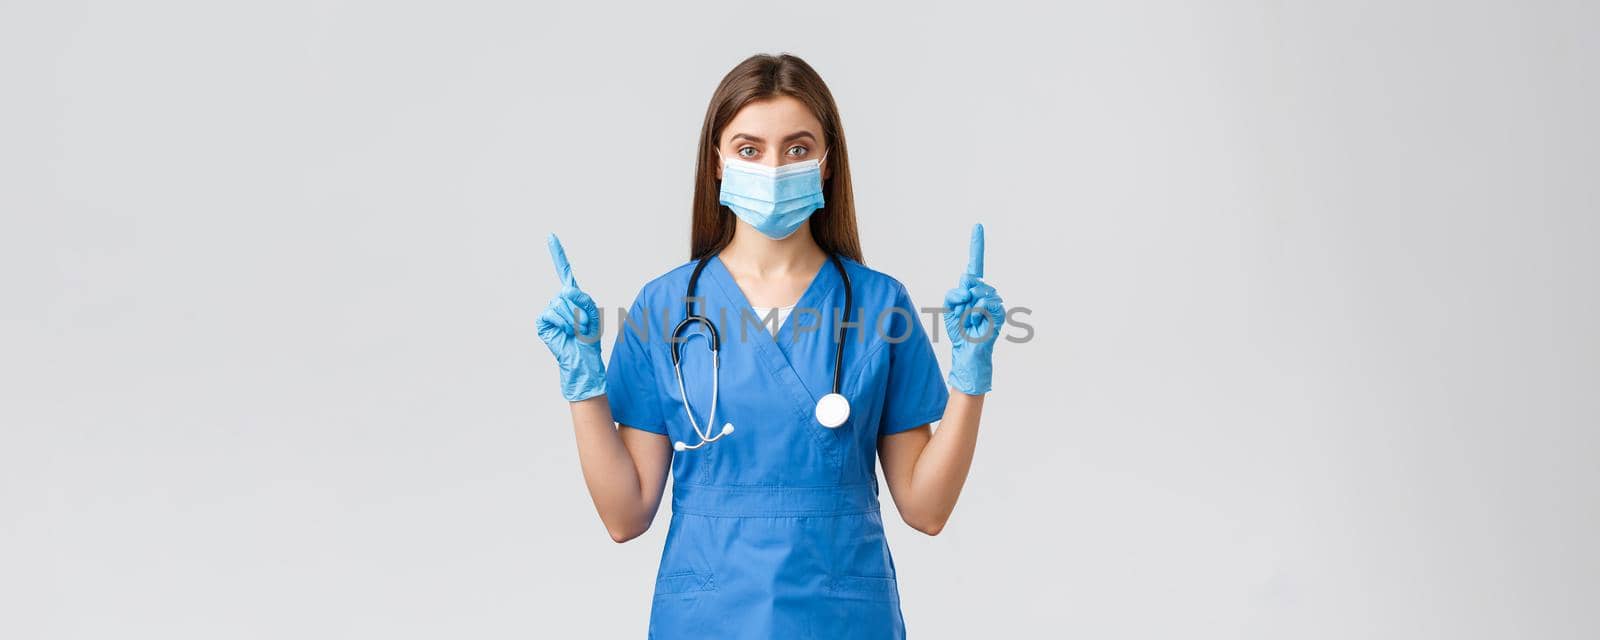 Covid-19, preventing virus, health, healthcare workers concept. Serious and confident female nurse in blue scrubs, medical mask PPE, pointing fingers up, inform patients how prevent corona infection.